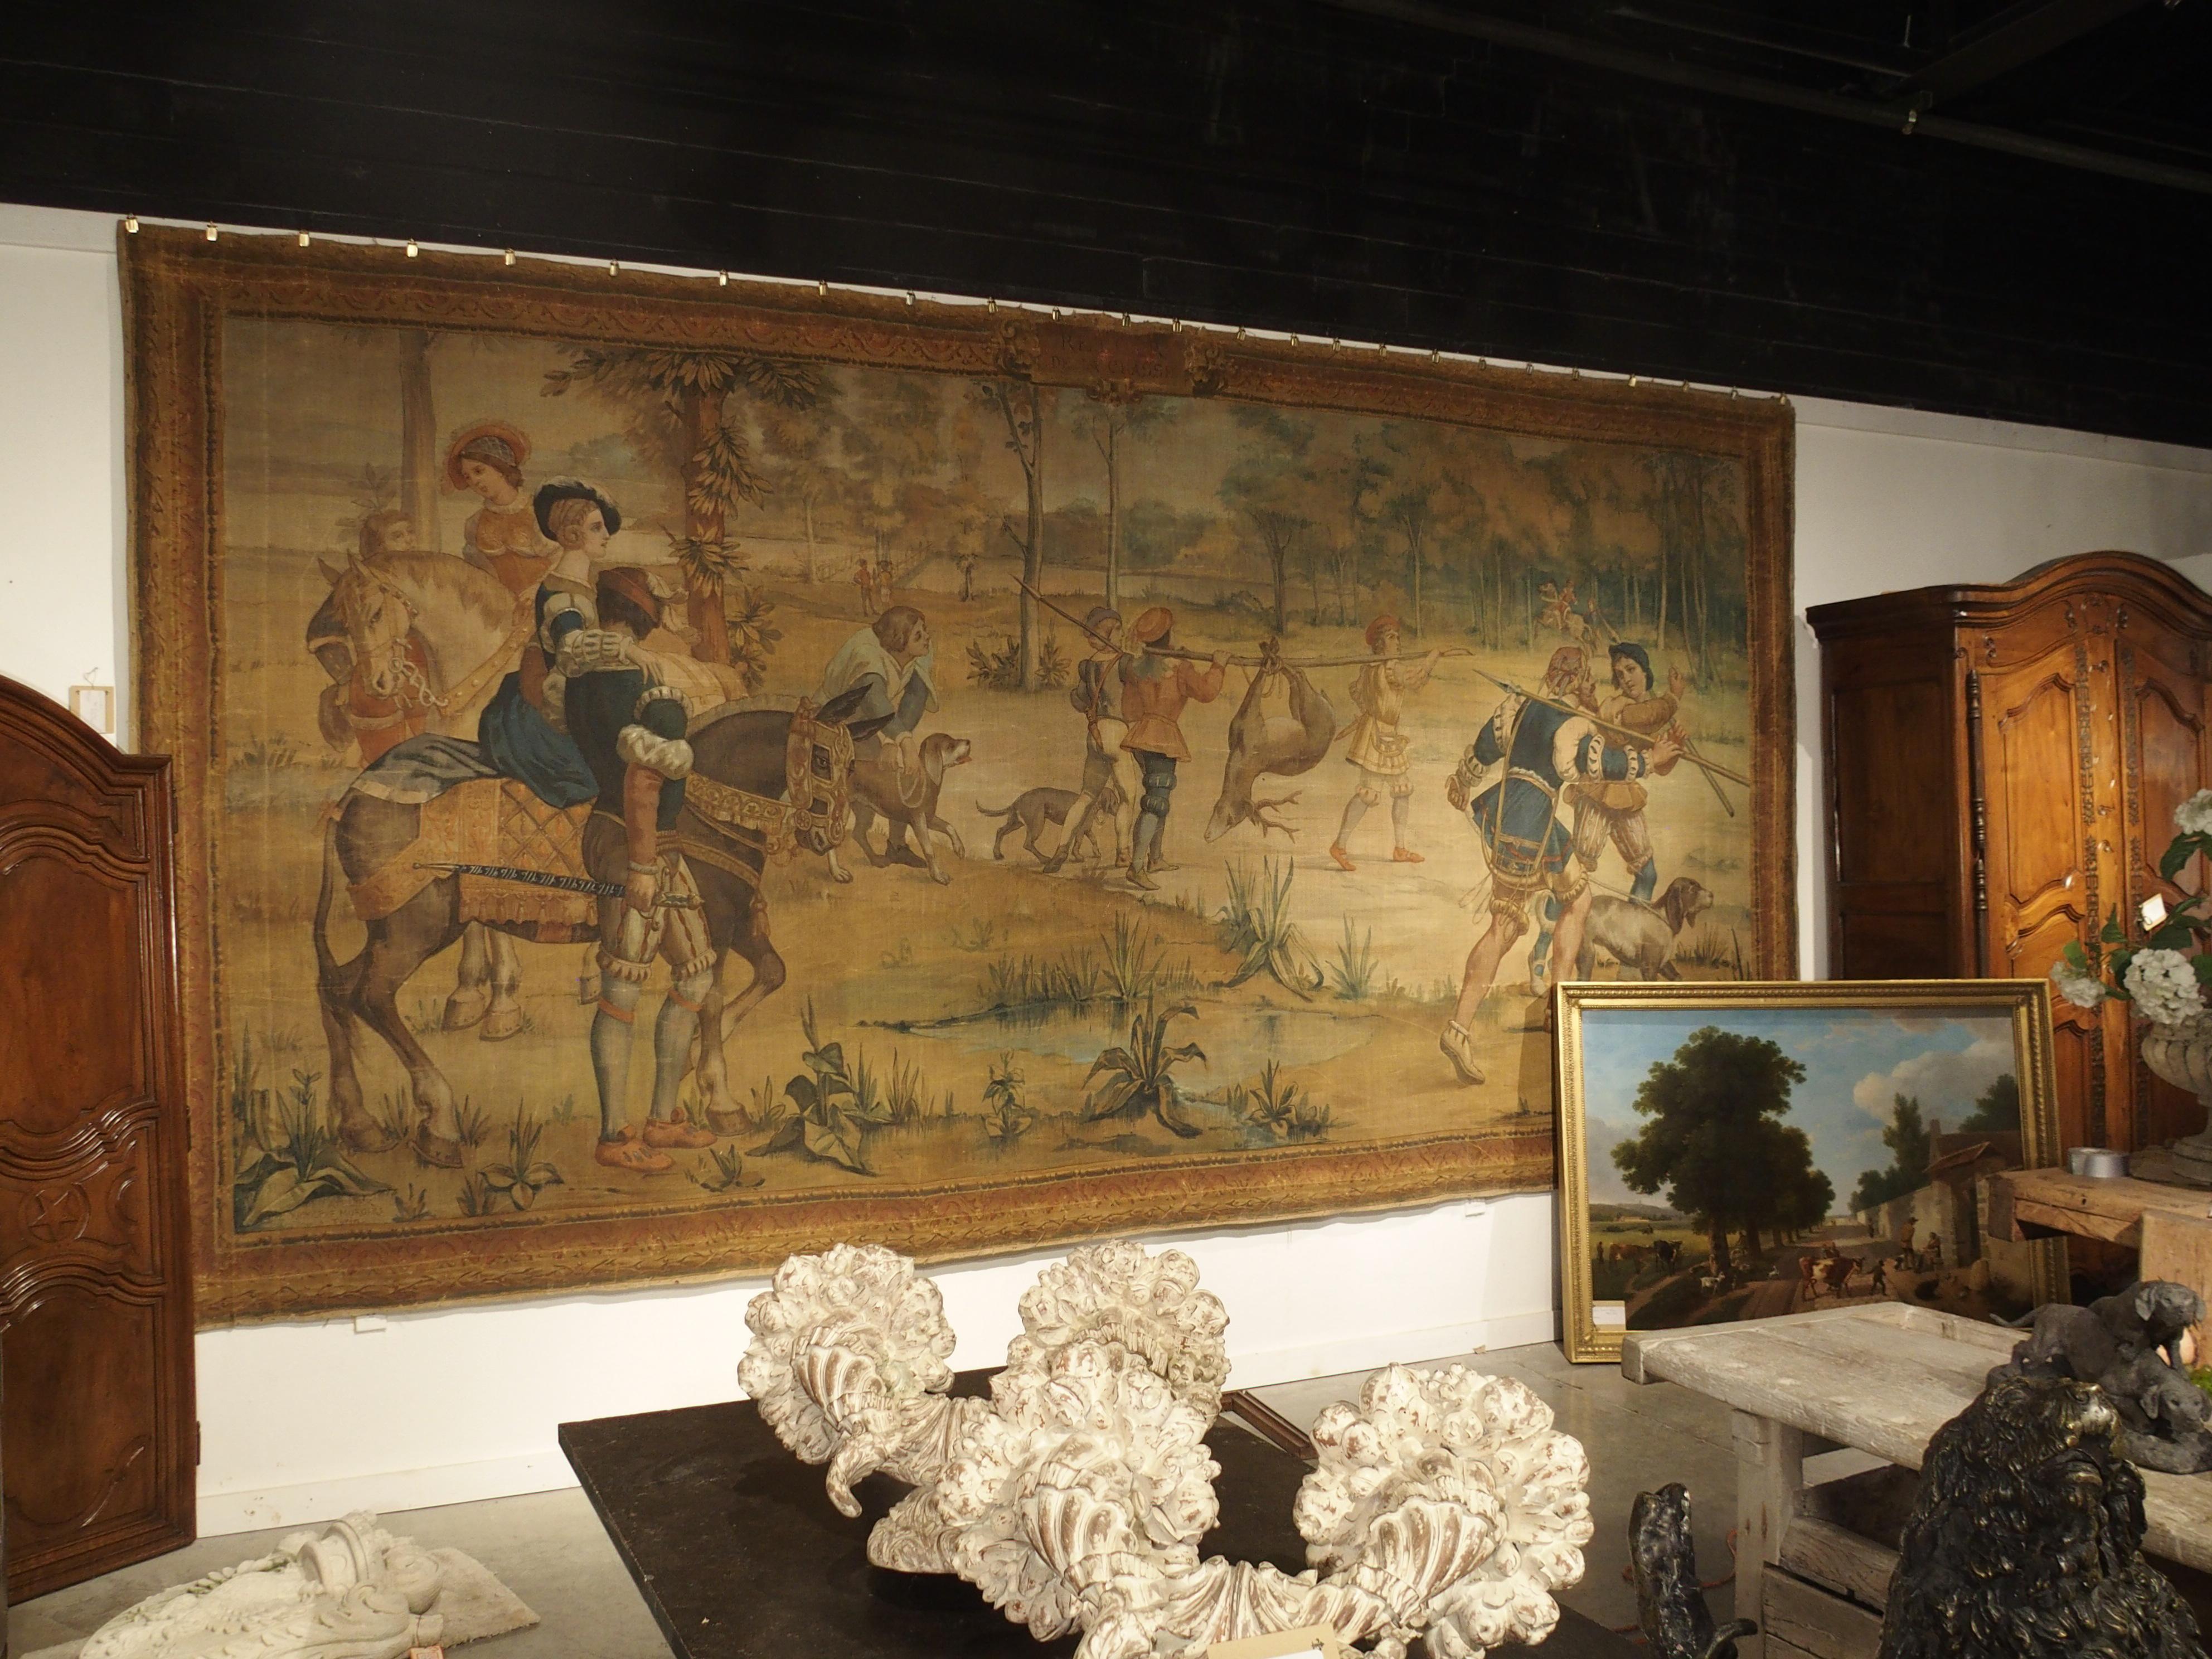 This massive hand painted 19th century canvas is more than 8 feet tall and 16 feet wide. The vibrant colors (brown, green, blue, cream, red, yellow and gray) are fantastic for a canvas of this age. The canvas has a 8 ½ inch stylish border all the